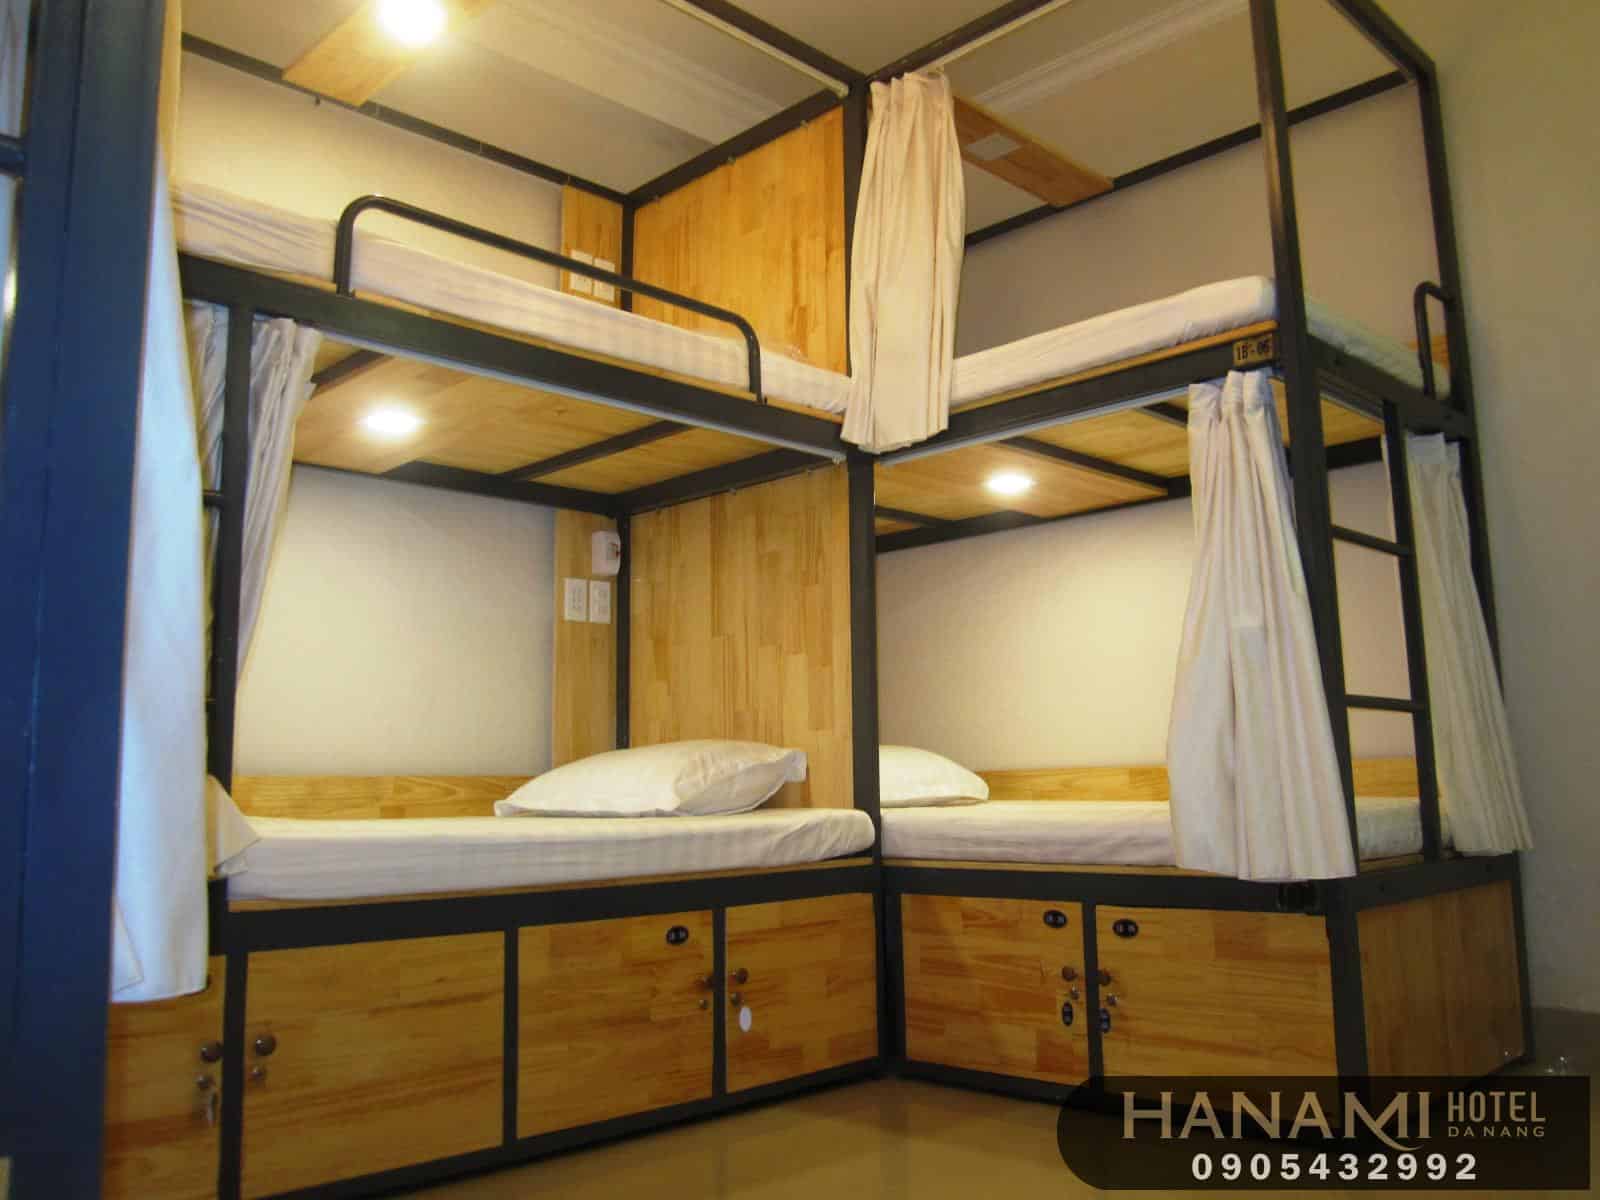 best places to buy bunks in da nang